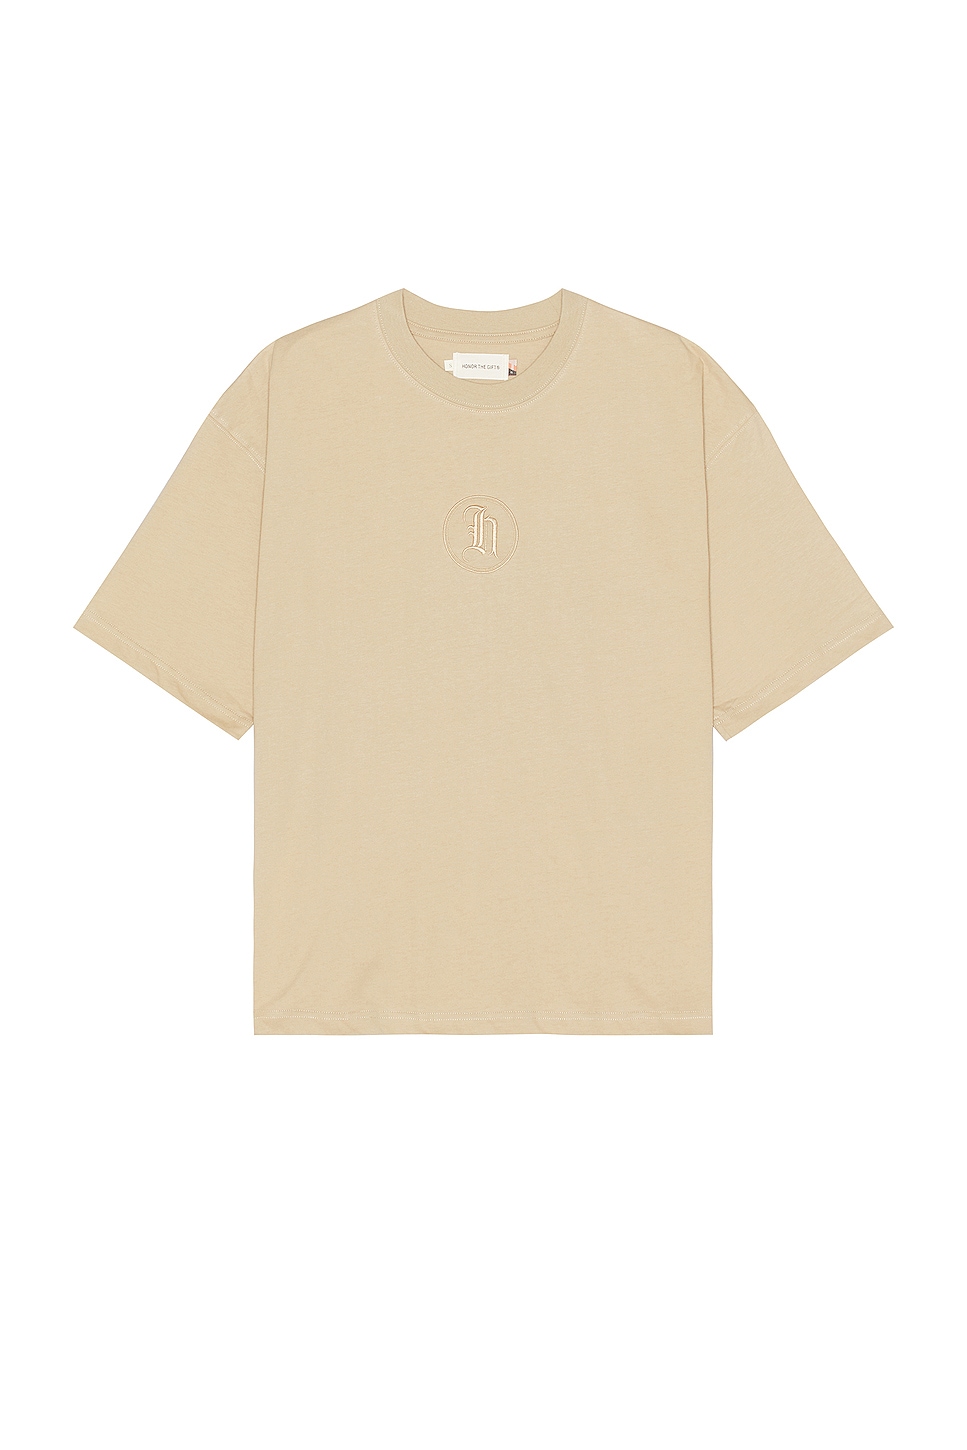 H Stamp Box Tee in Brown